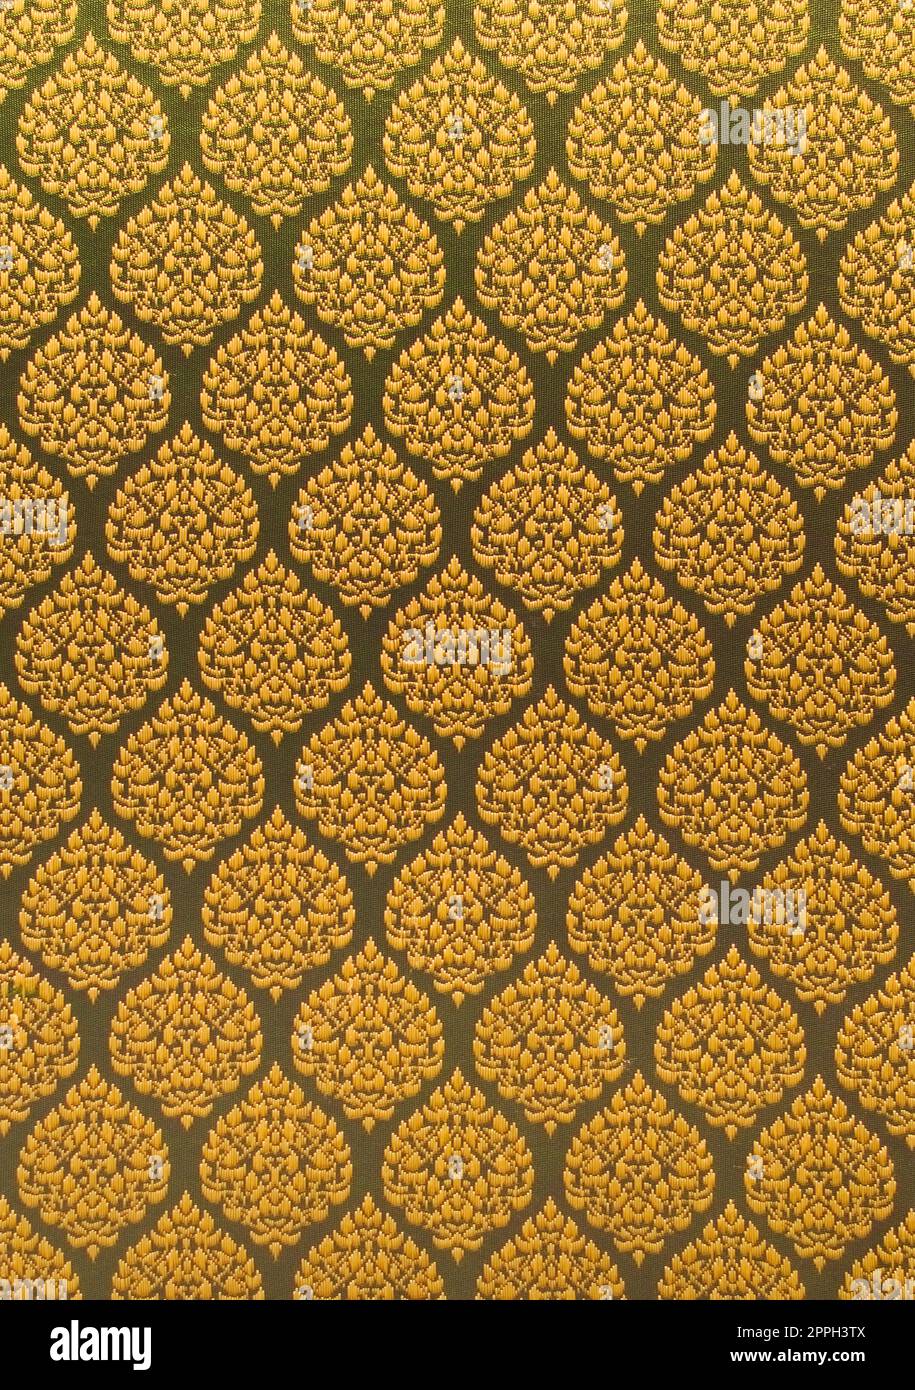 Elegant golden thread repeating pattern over a textile surface. Close up shot. Stock Photo